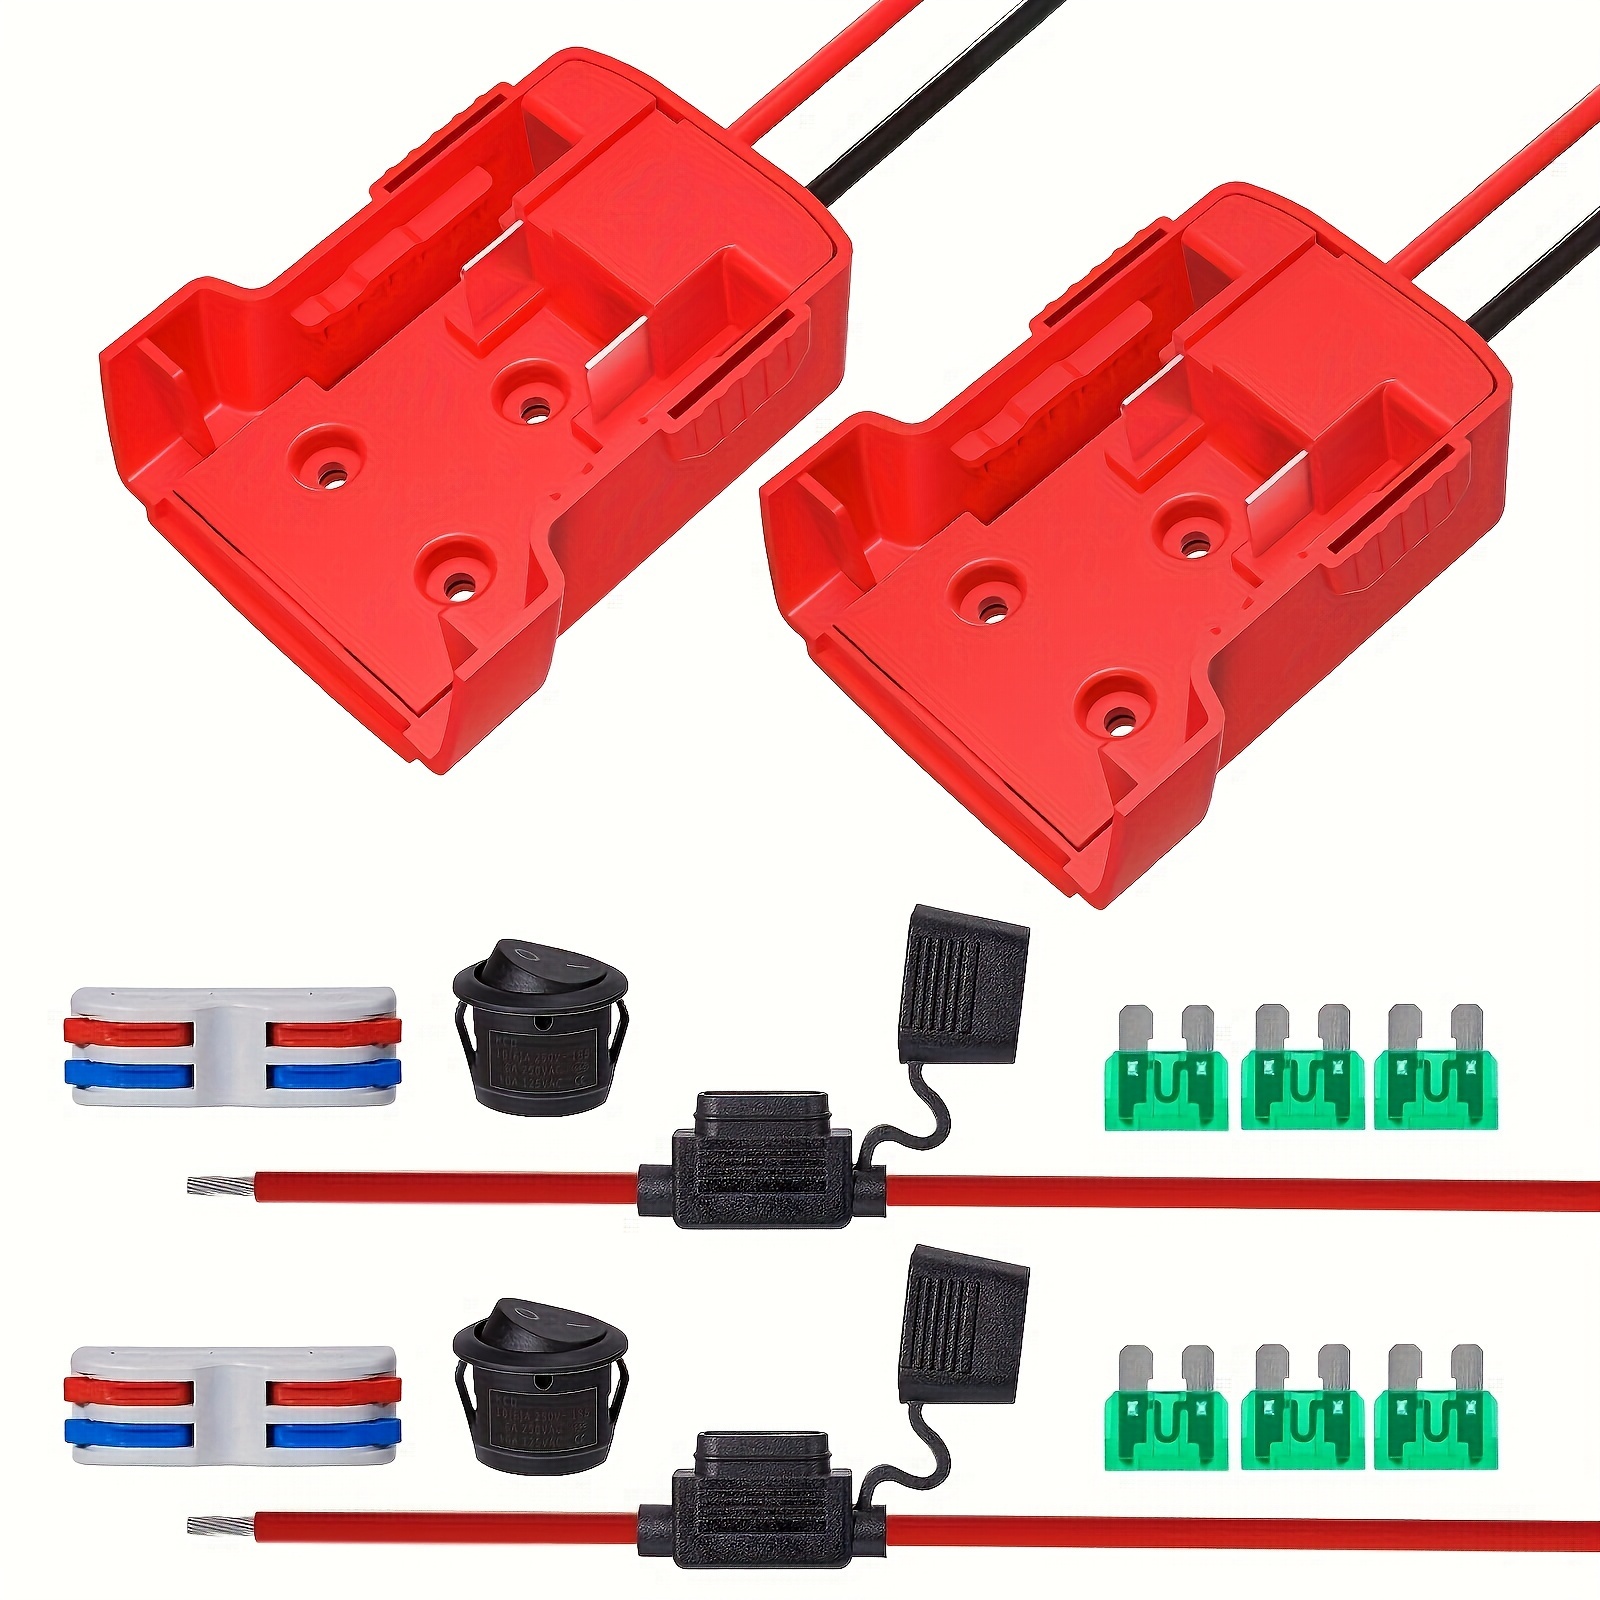 

1/2pcs Power Wheels Adapter For Adapter 18v Power Wheels Battery Conversion Kit With Fuse & Switch, Wire Terminals